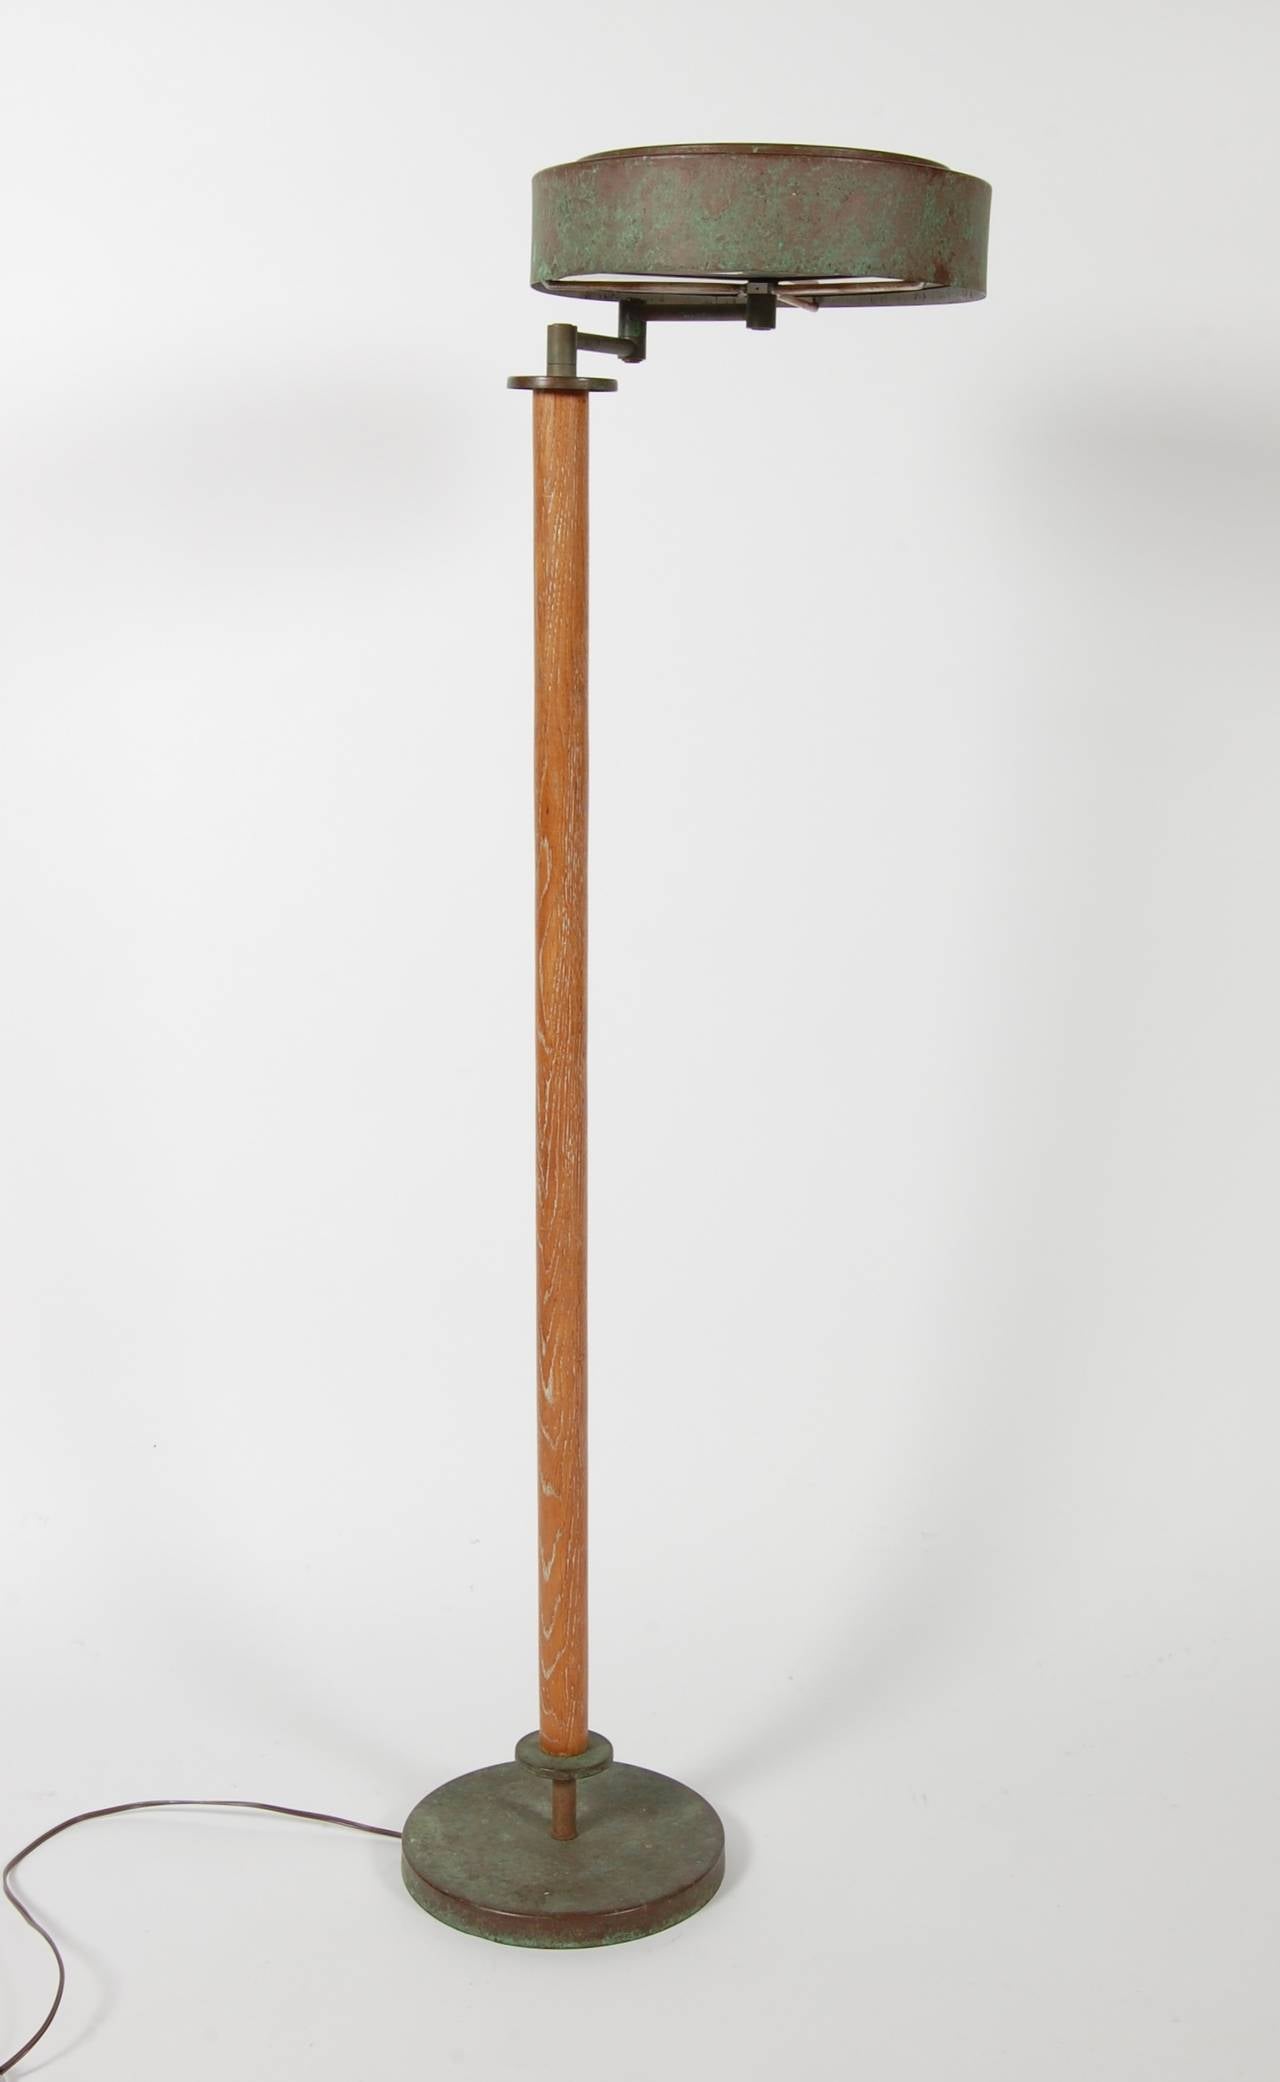 A early 1940s production Walter Von Nessen floor lamp, with its beautifully patinated metal work and aged oak upright. Trademark Von Nessen design swing arm and metal shade with both top and bottom opaque white glass diffusers. Professionally